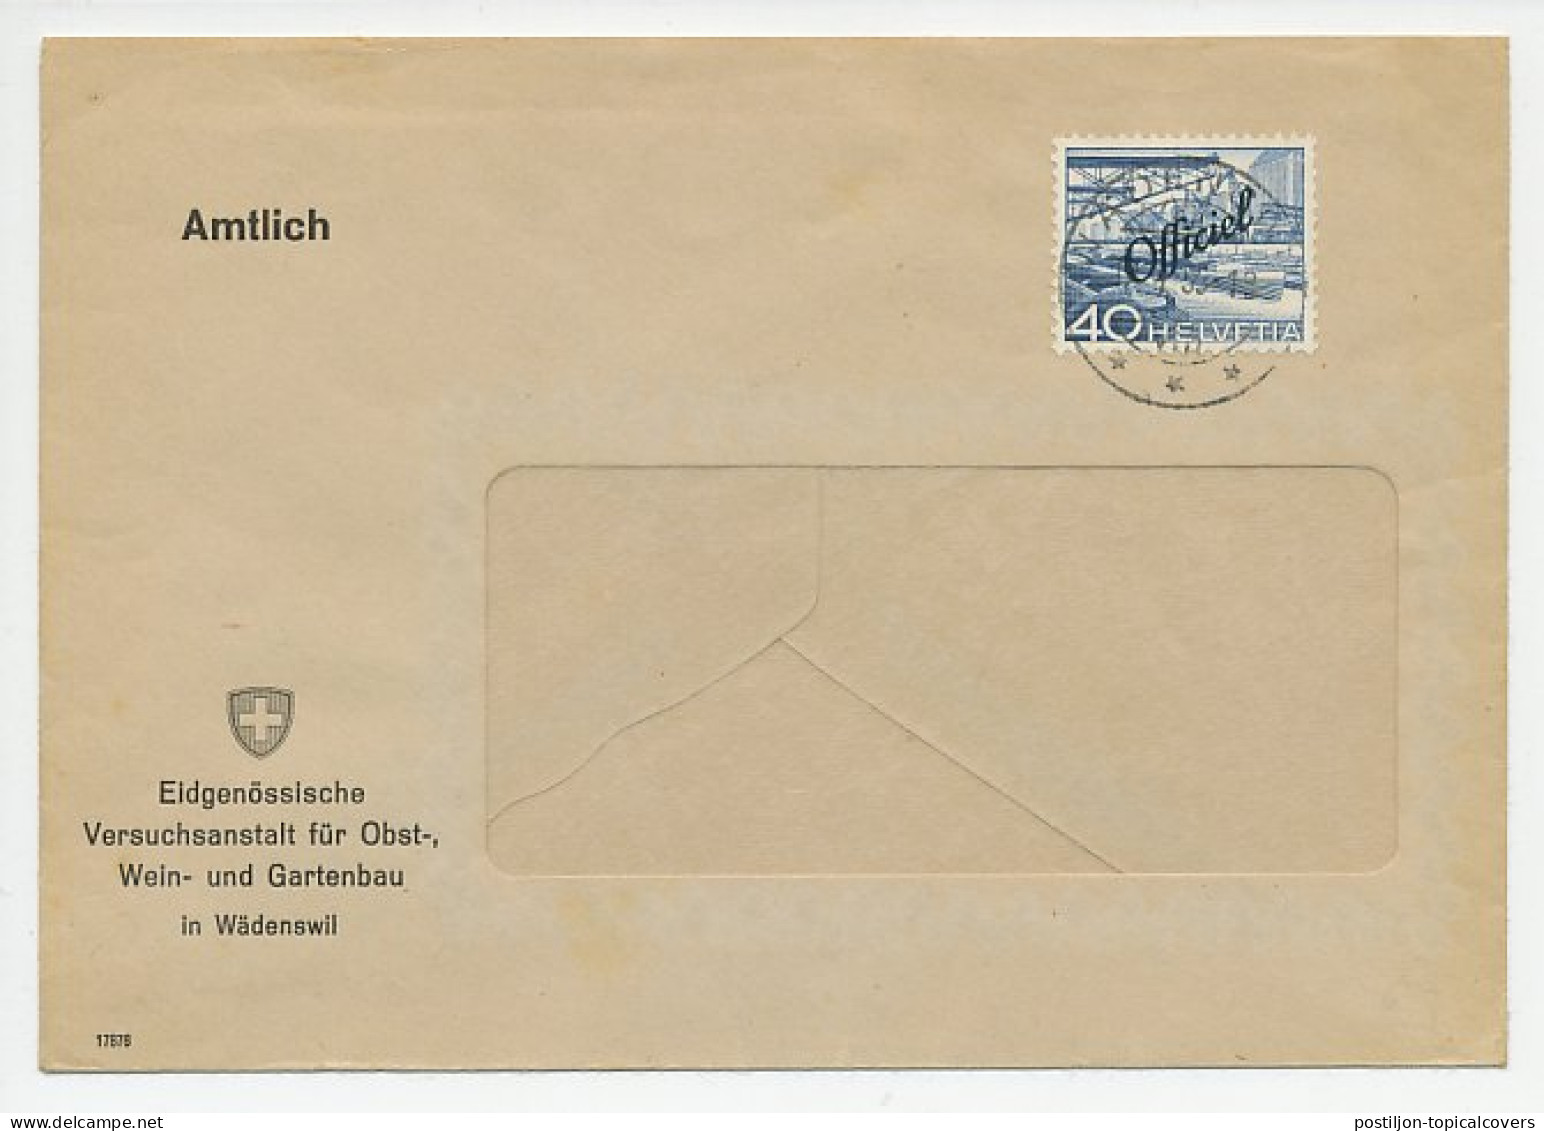 Official Service Cover / Postmark Switzerland 1955 Federal Research Institute For Fruit, Wine And Horticulture - Wines & Alcohols